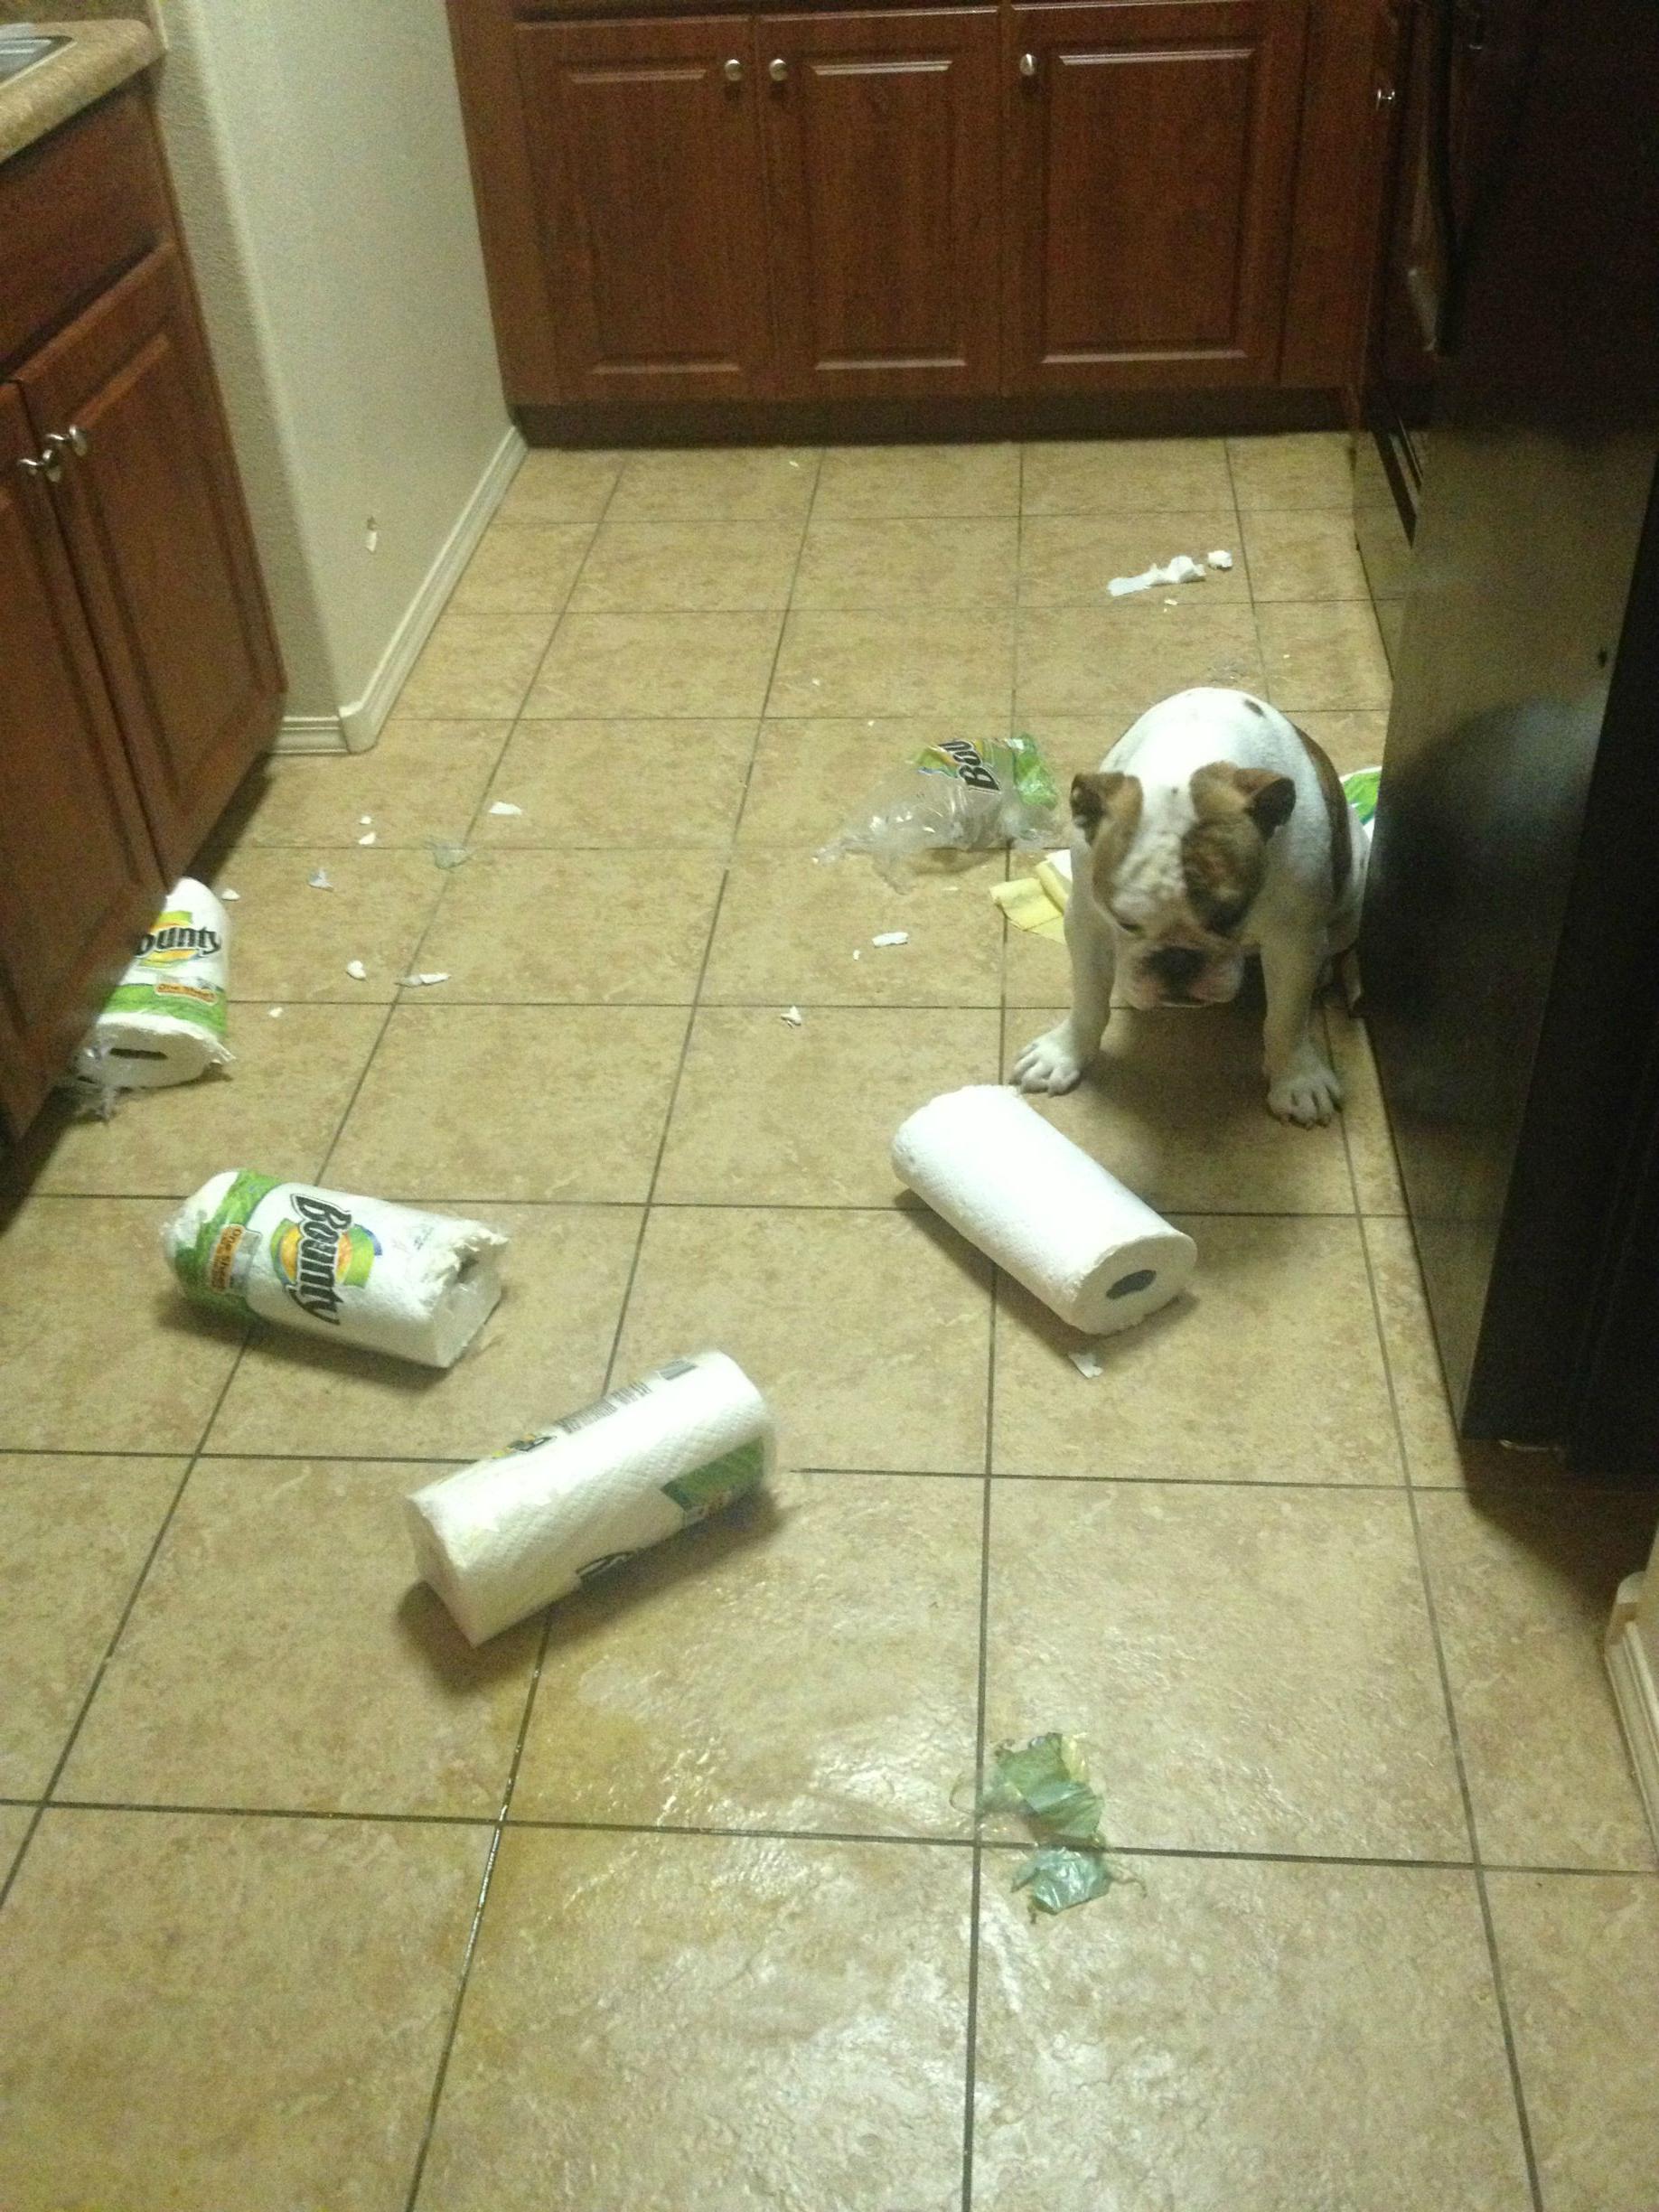 At least there are paper towels to clean it up.